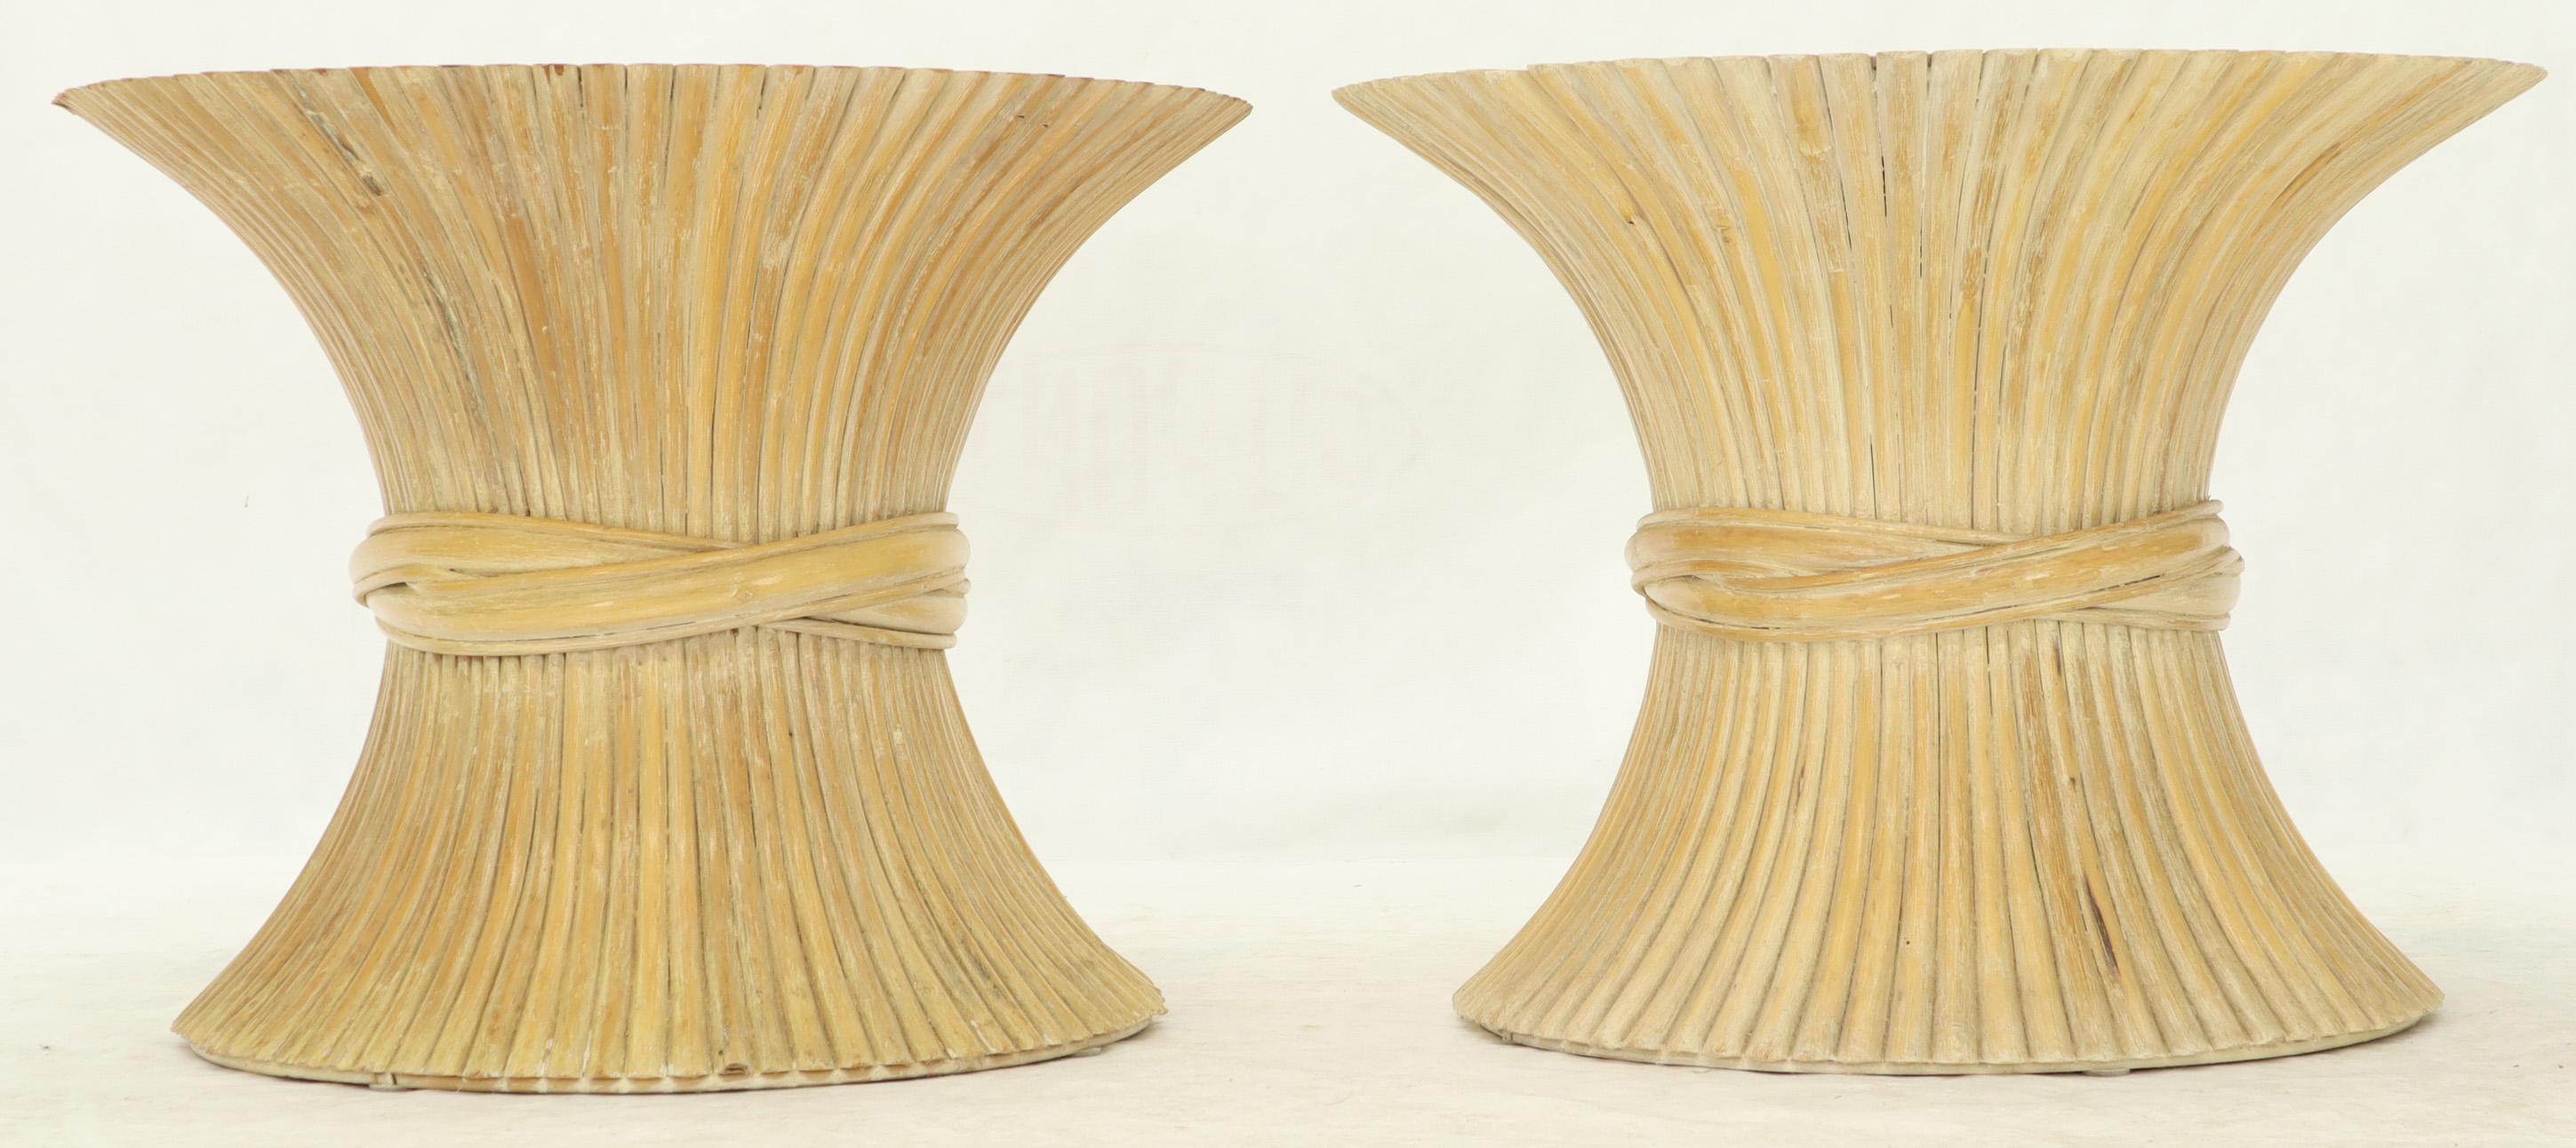 Mid-Century Modern Pair of Sheaf of Bamboo Wheat Side End Occasional Tables Pedestals by McGuire